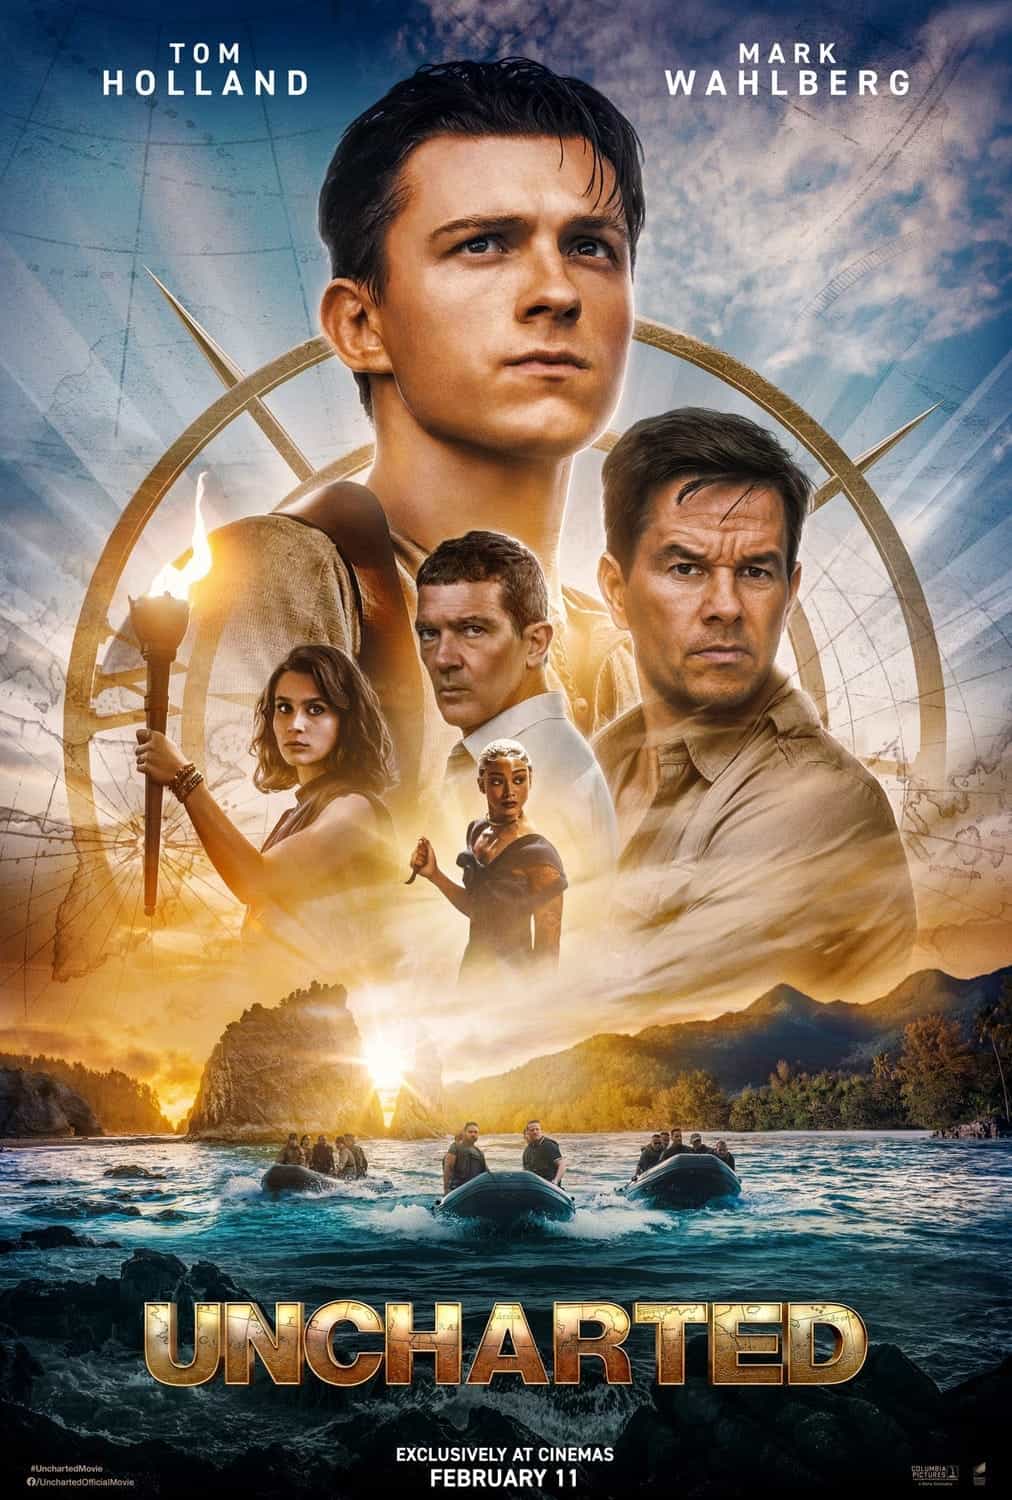 New poster released for Uncharted which stars Tom Holland - the movie is released 18th February 2022 #uncharted